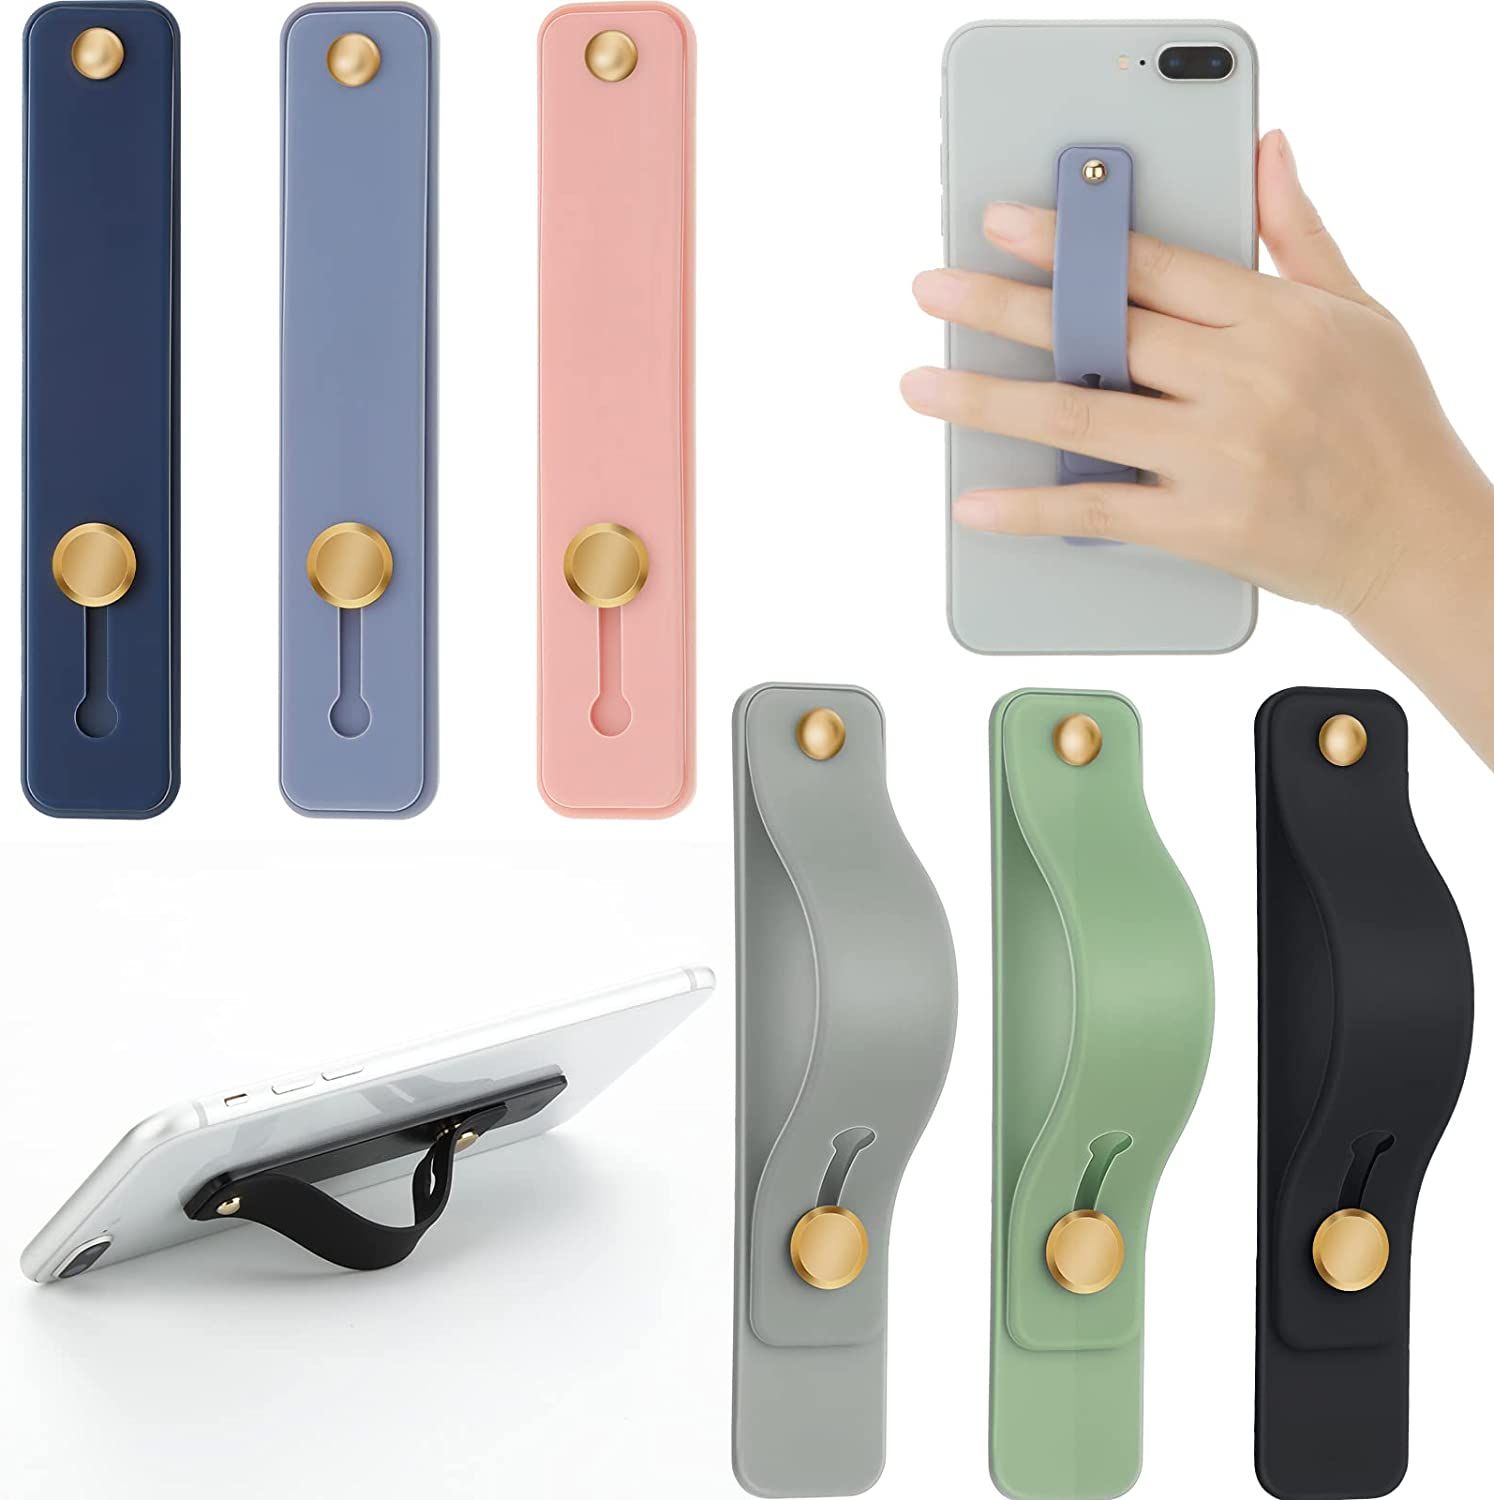 6 Pieces Telescopic Phone Grip Holder Stand With Finger Strap for Smartphones - Soft Colors | Amazon (US)